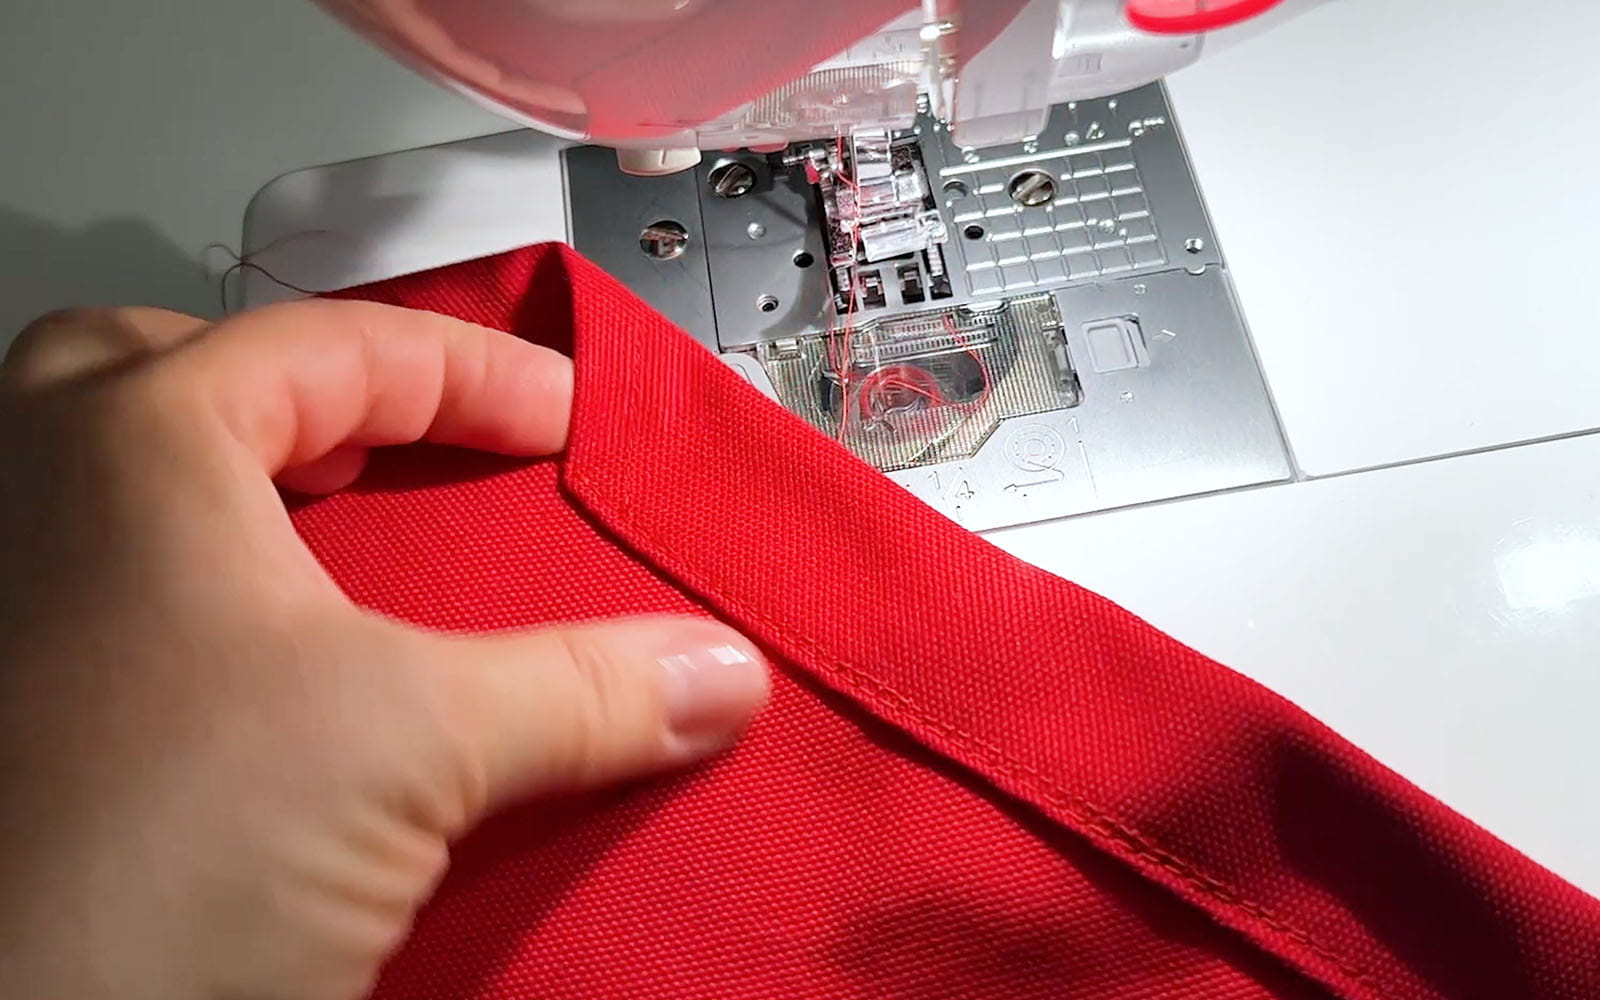 Showing fold on red fabric